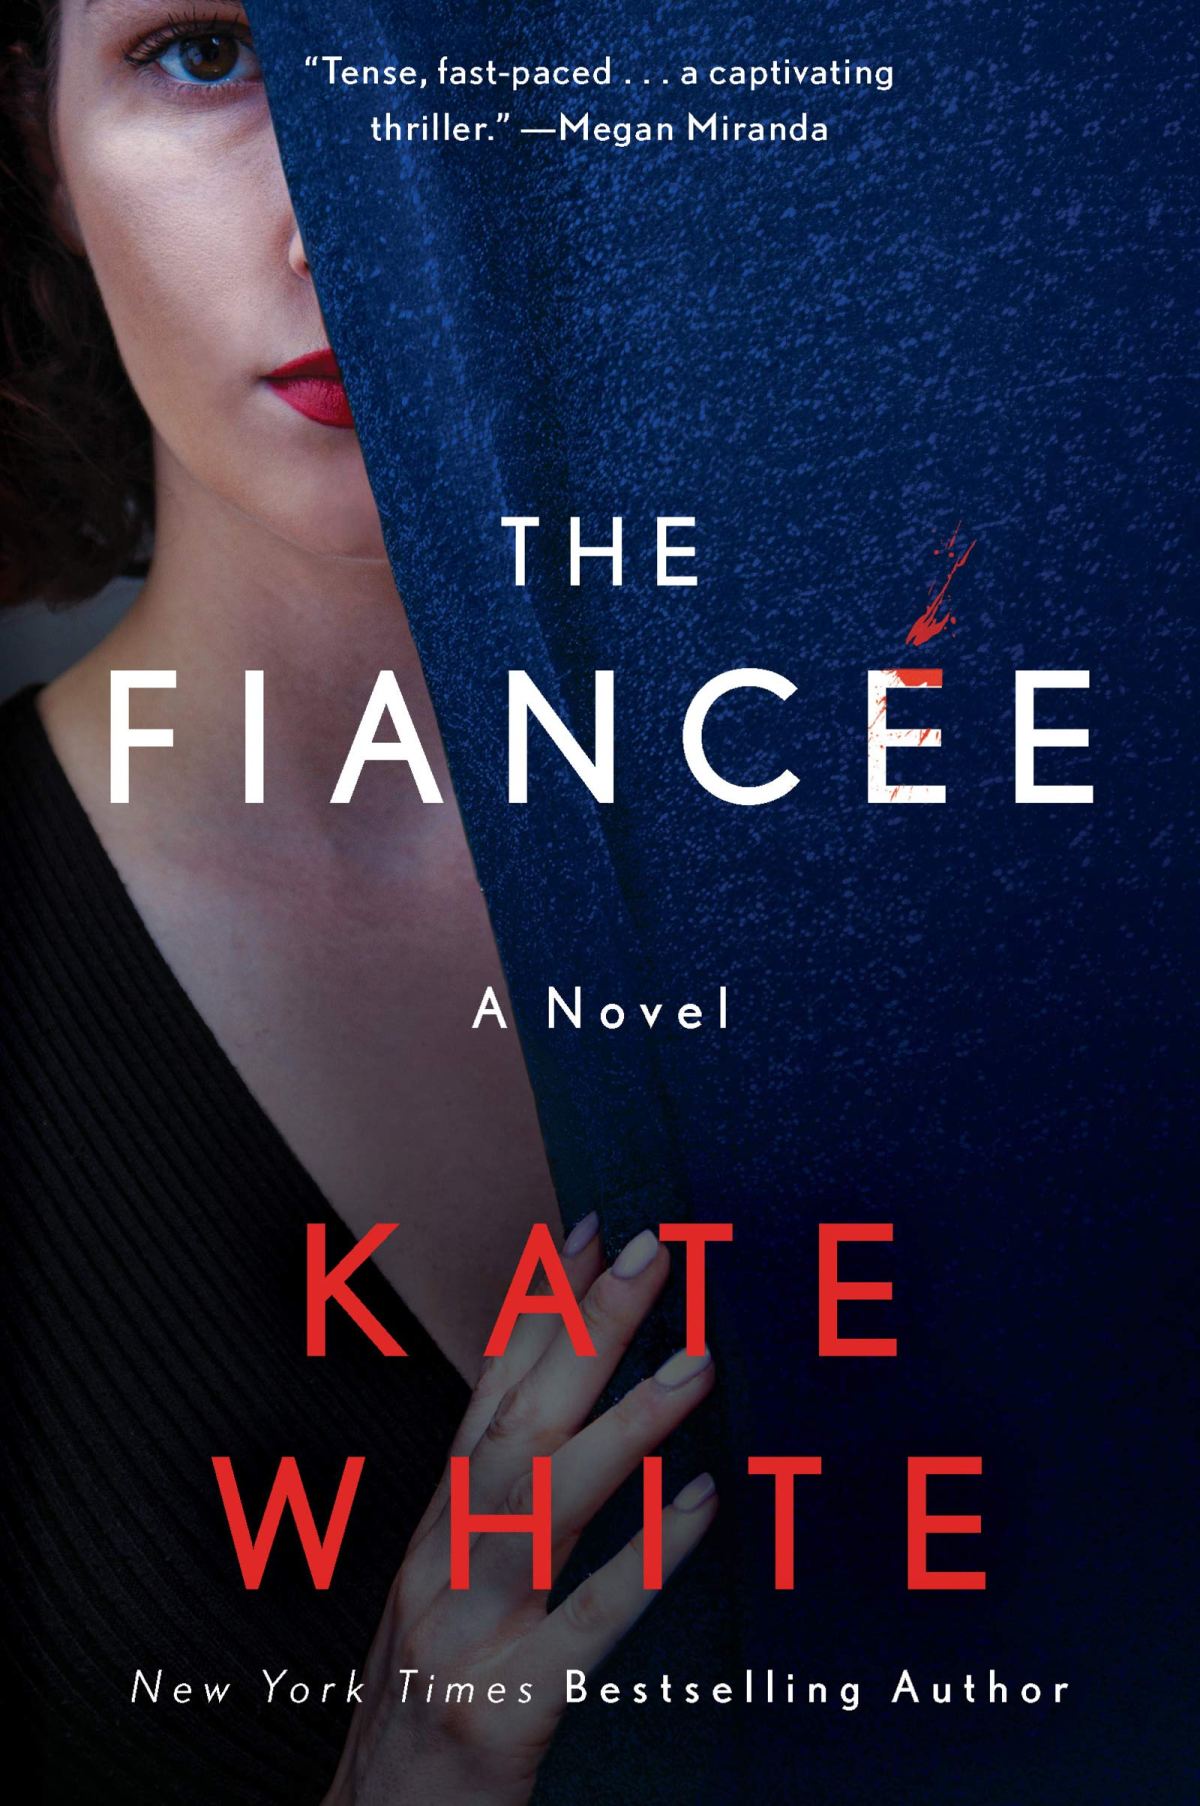 Book 118 – The Fiancée by Kate White